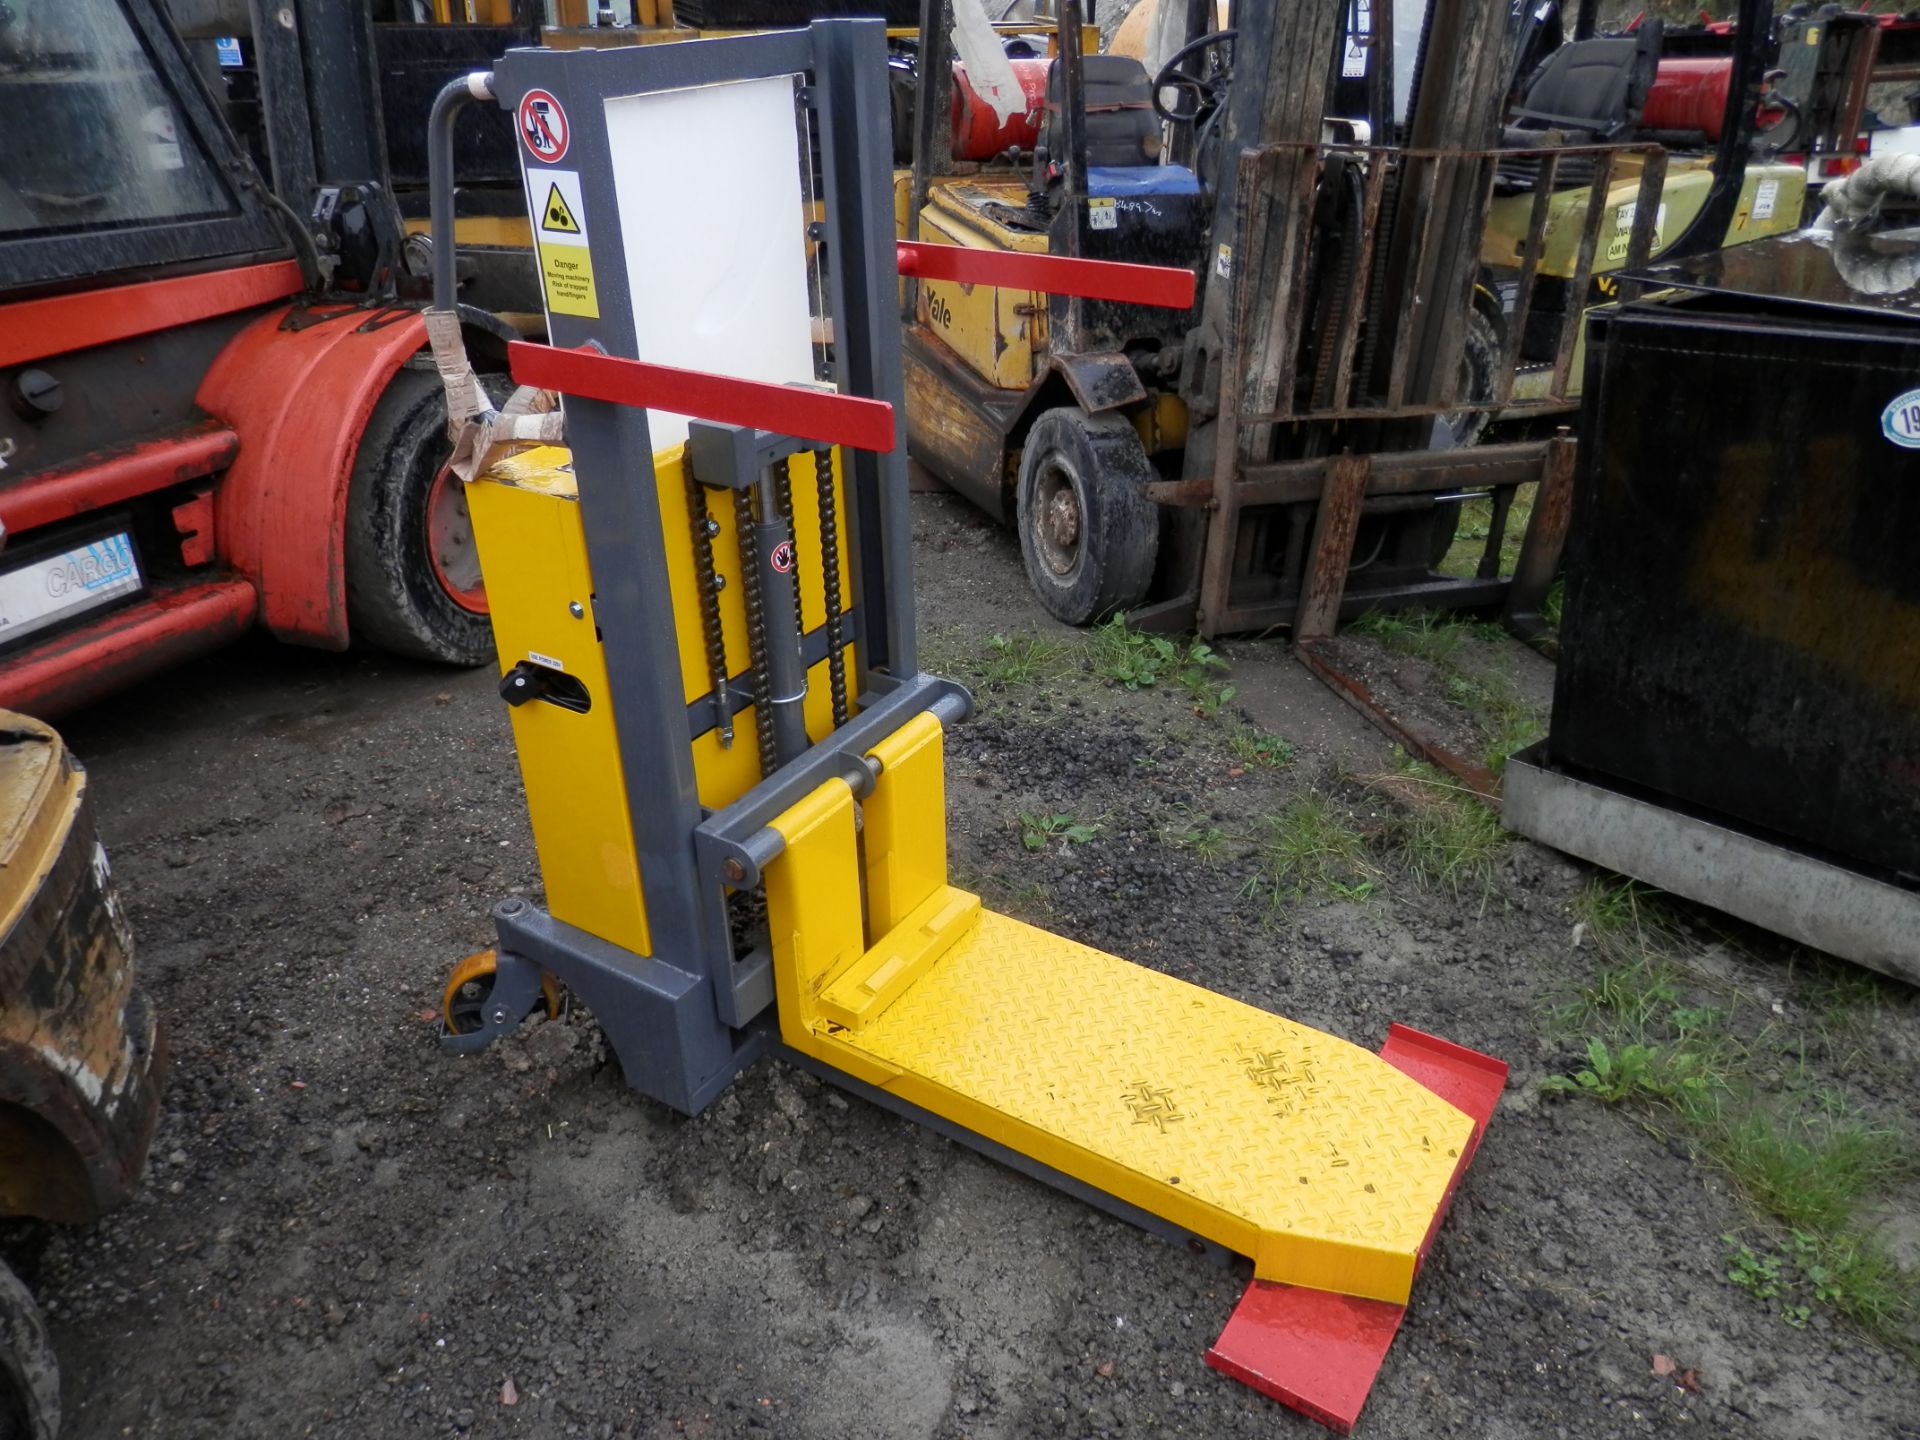 NEW WARRIOR 12V ELECTRIC PALLET TRUCK, 5 AVAILABLE. 250KG LIFT CAPACITY, 1000MM. (2 OF 5) - Image 2 of 6